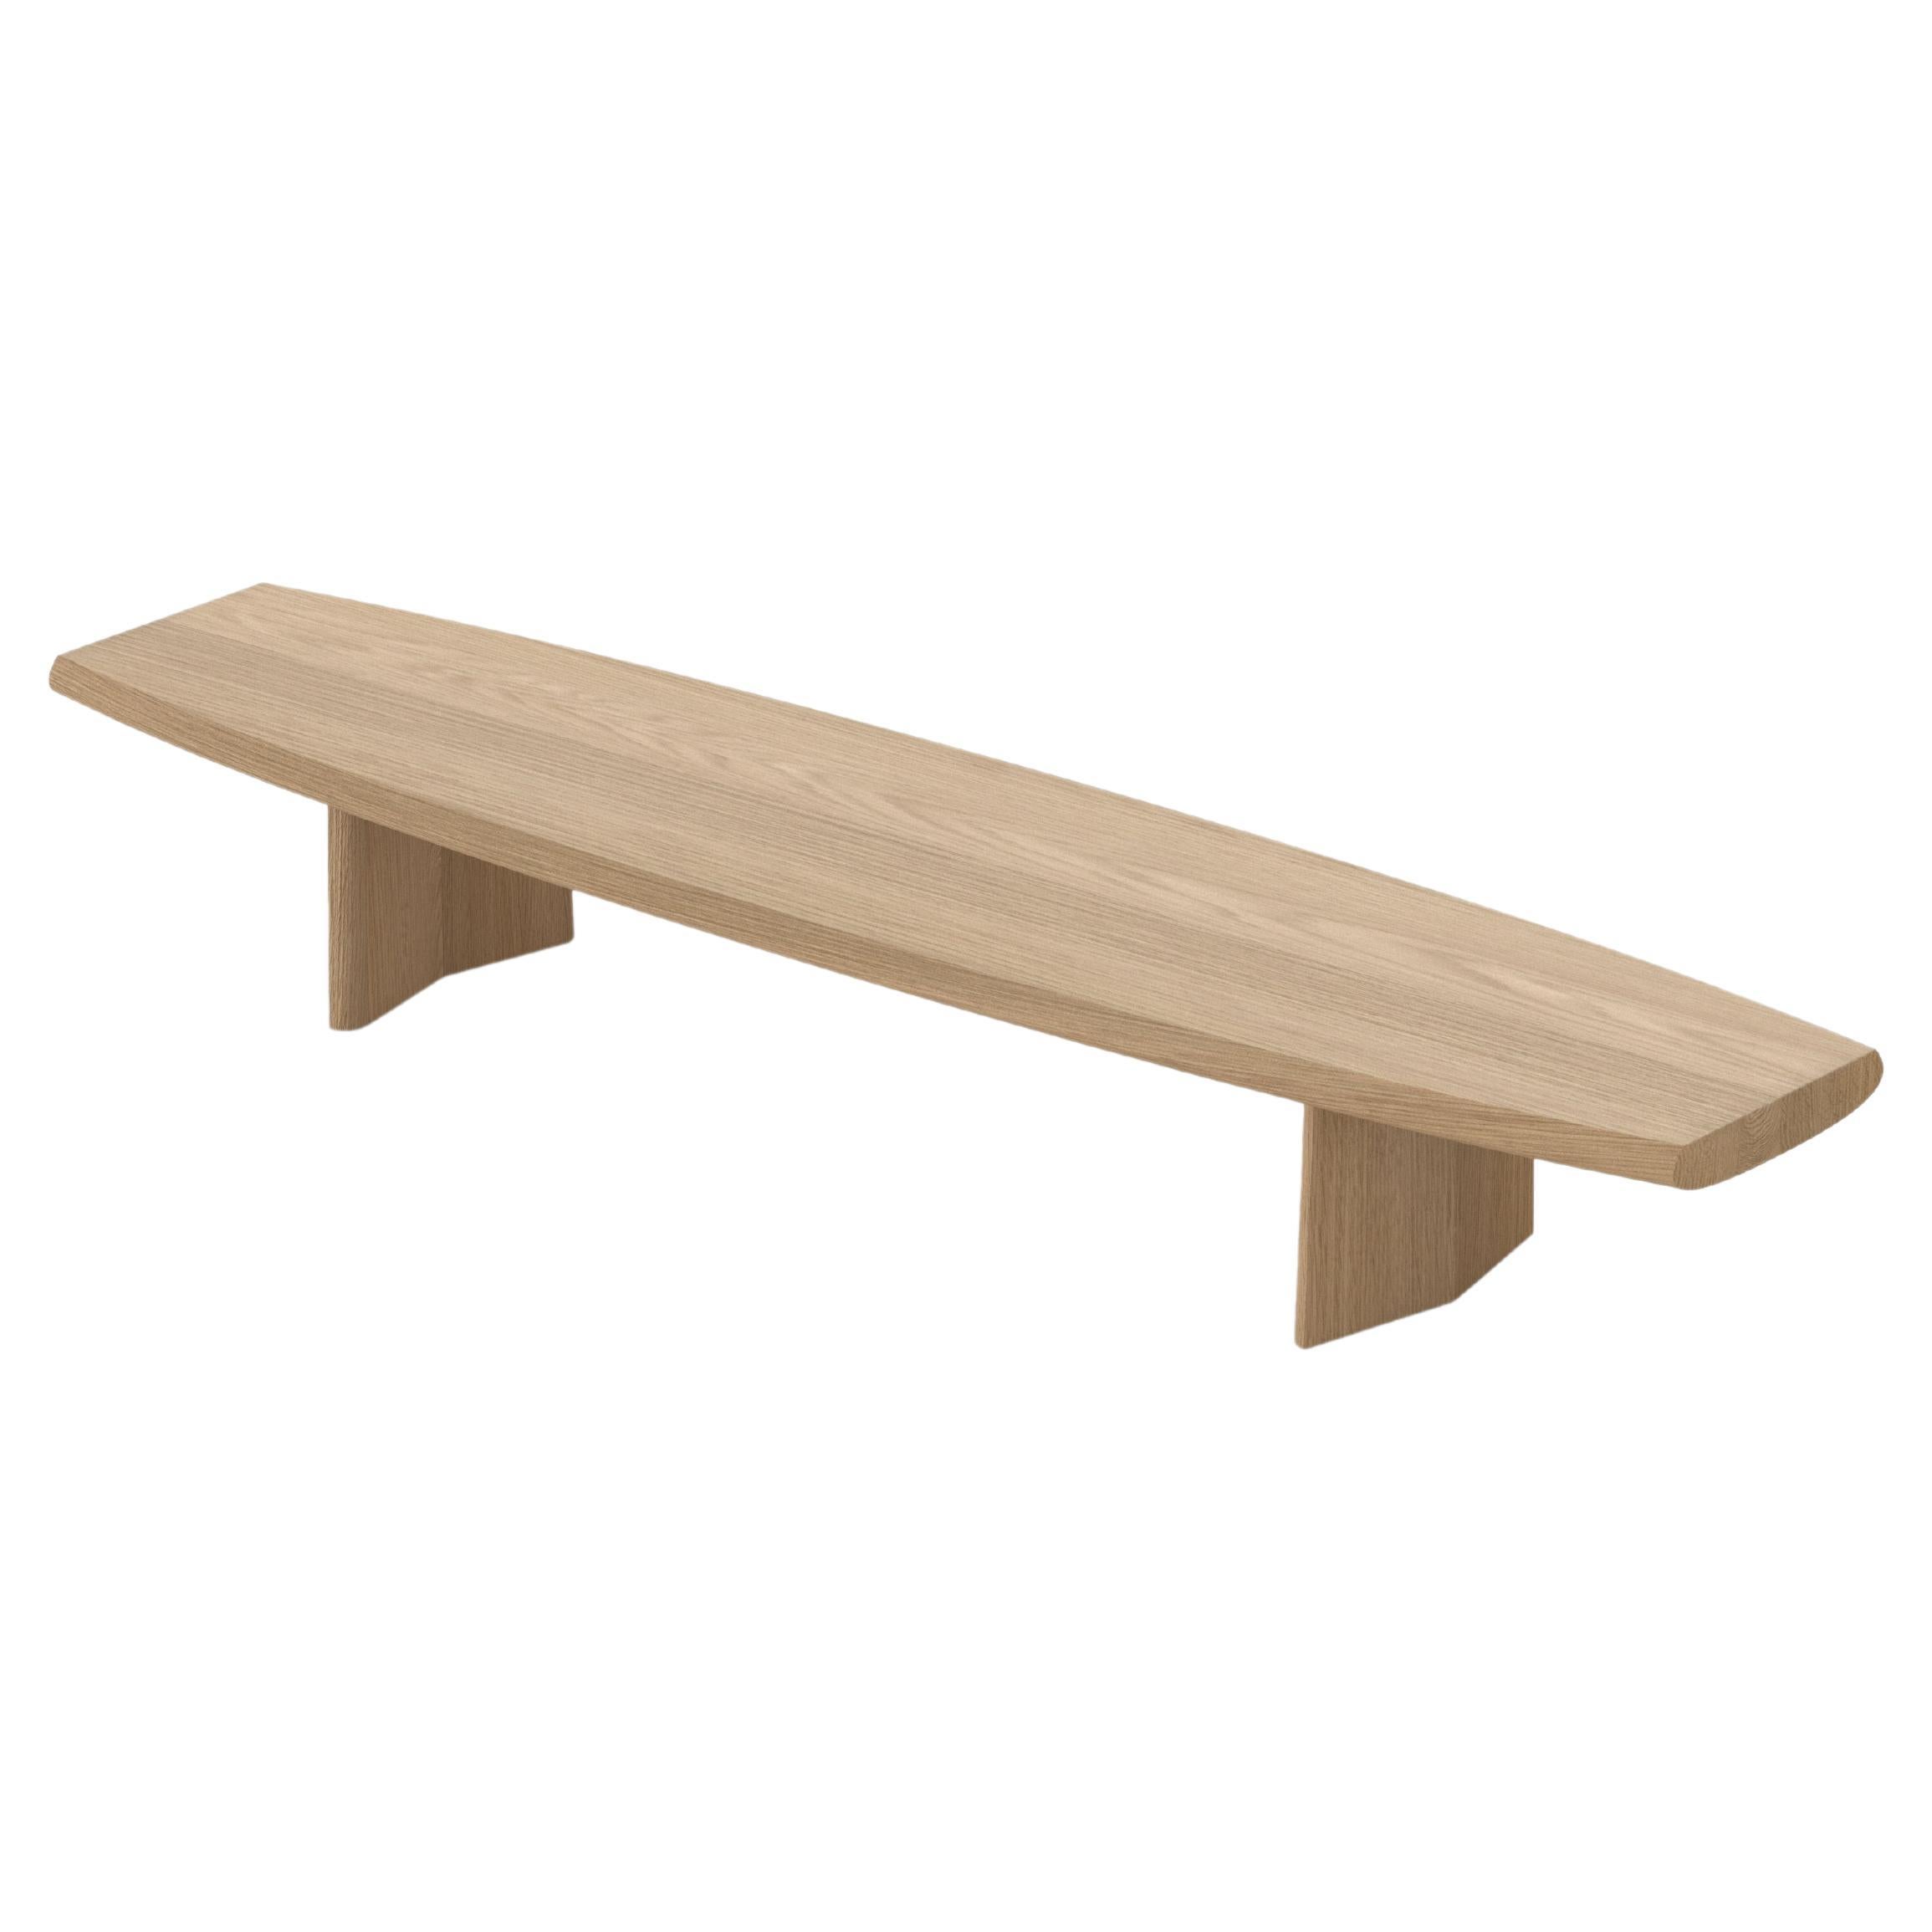 Peana Low Coffee Table, Bench in Natural Oak Wood Finish by Joel Escalona For Sale